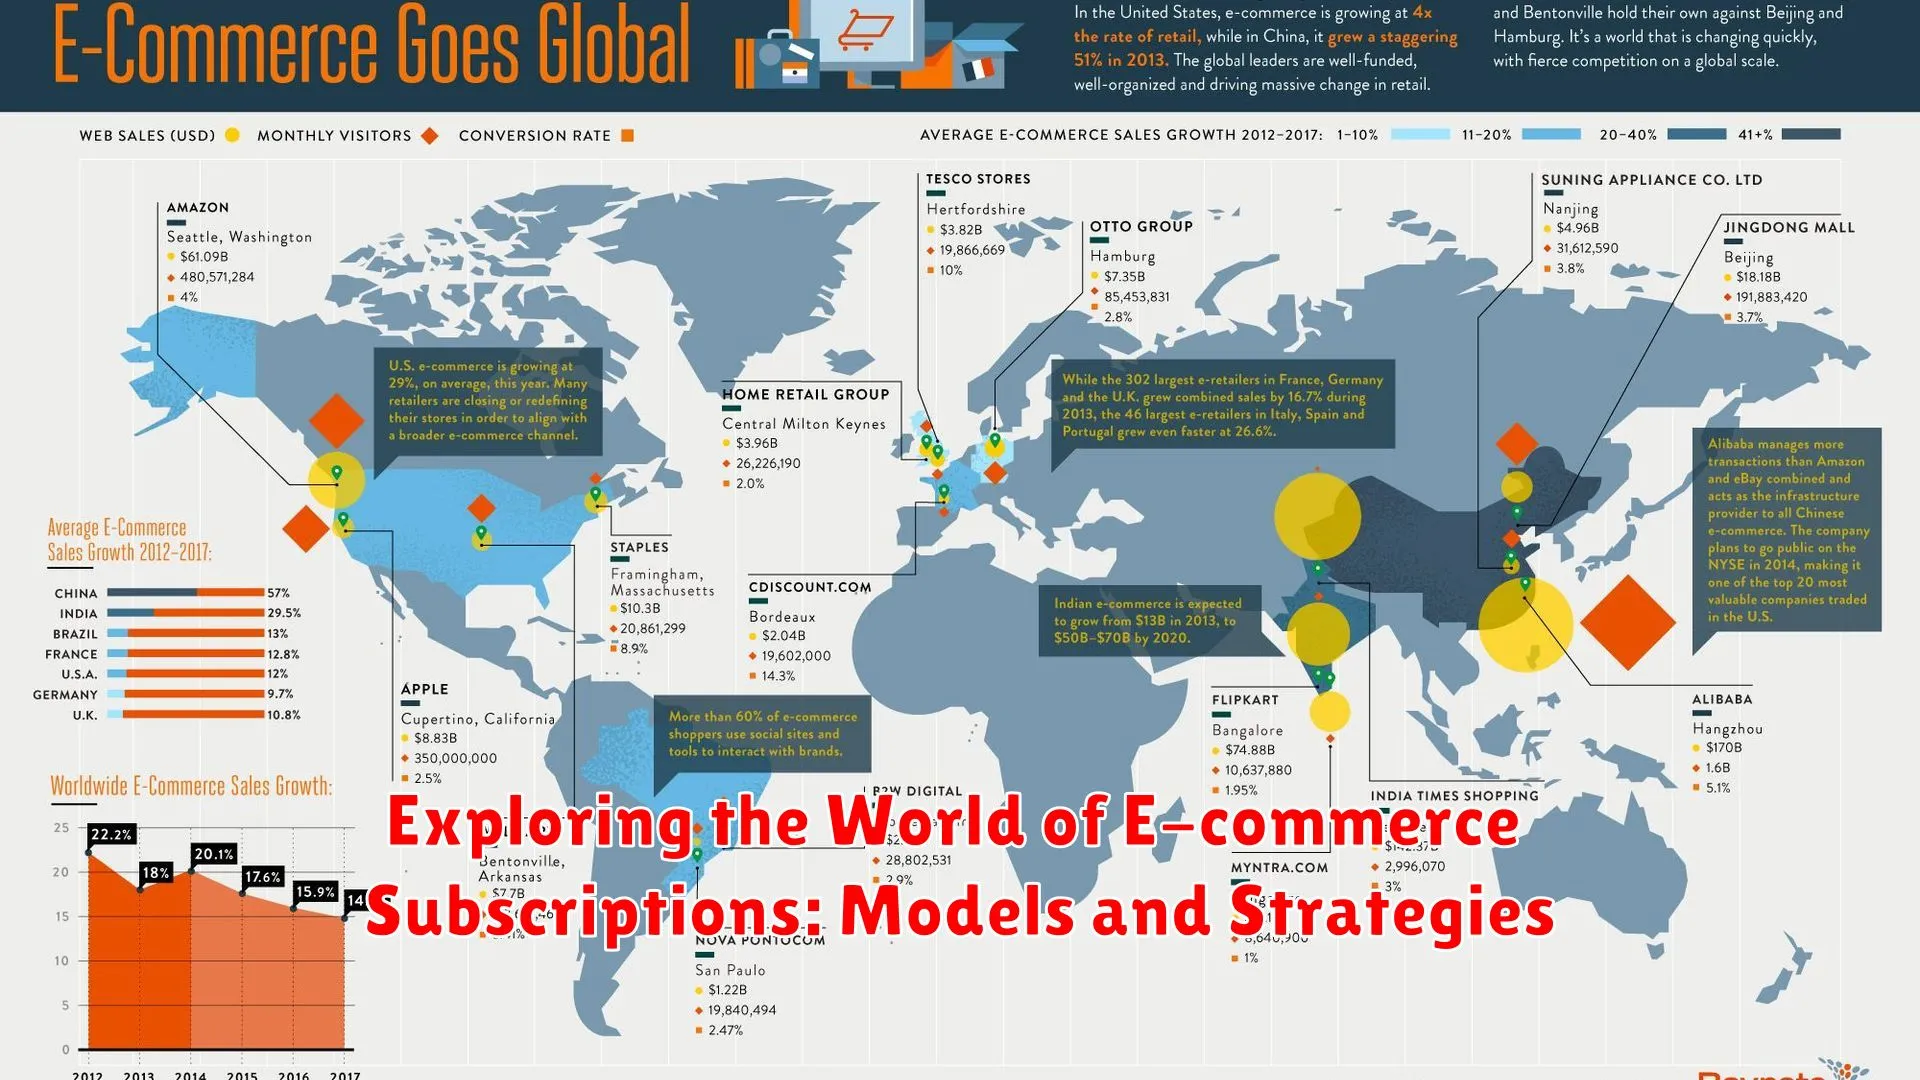 Exploring the World of E-commerce Subscriptions: Models and Strategies